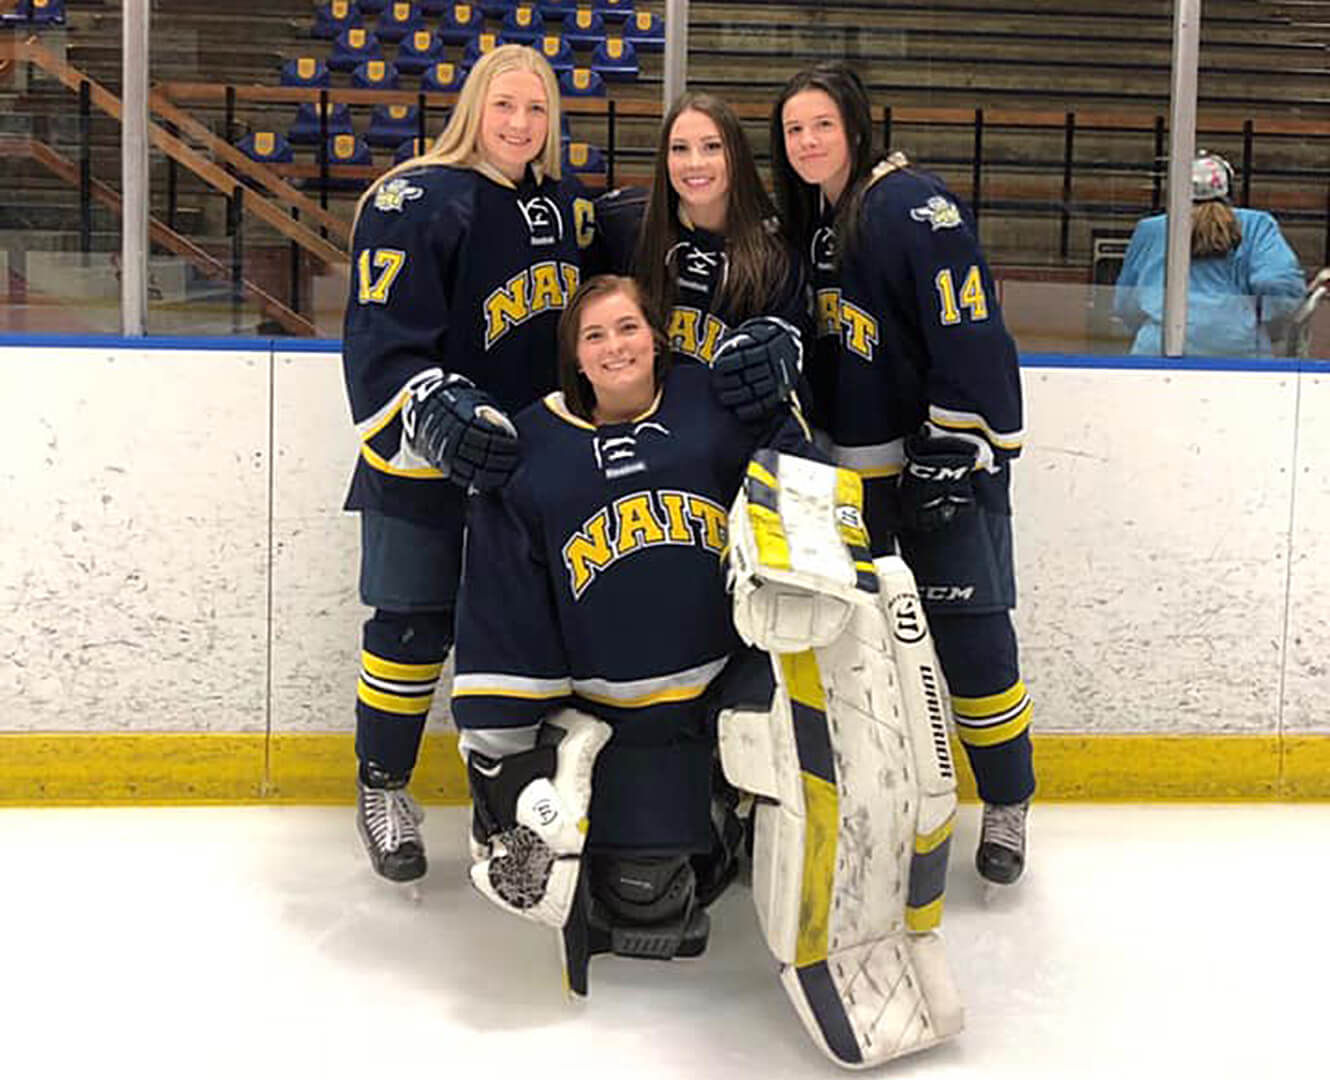 NAIT Ooks player survived cancer